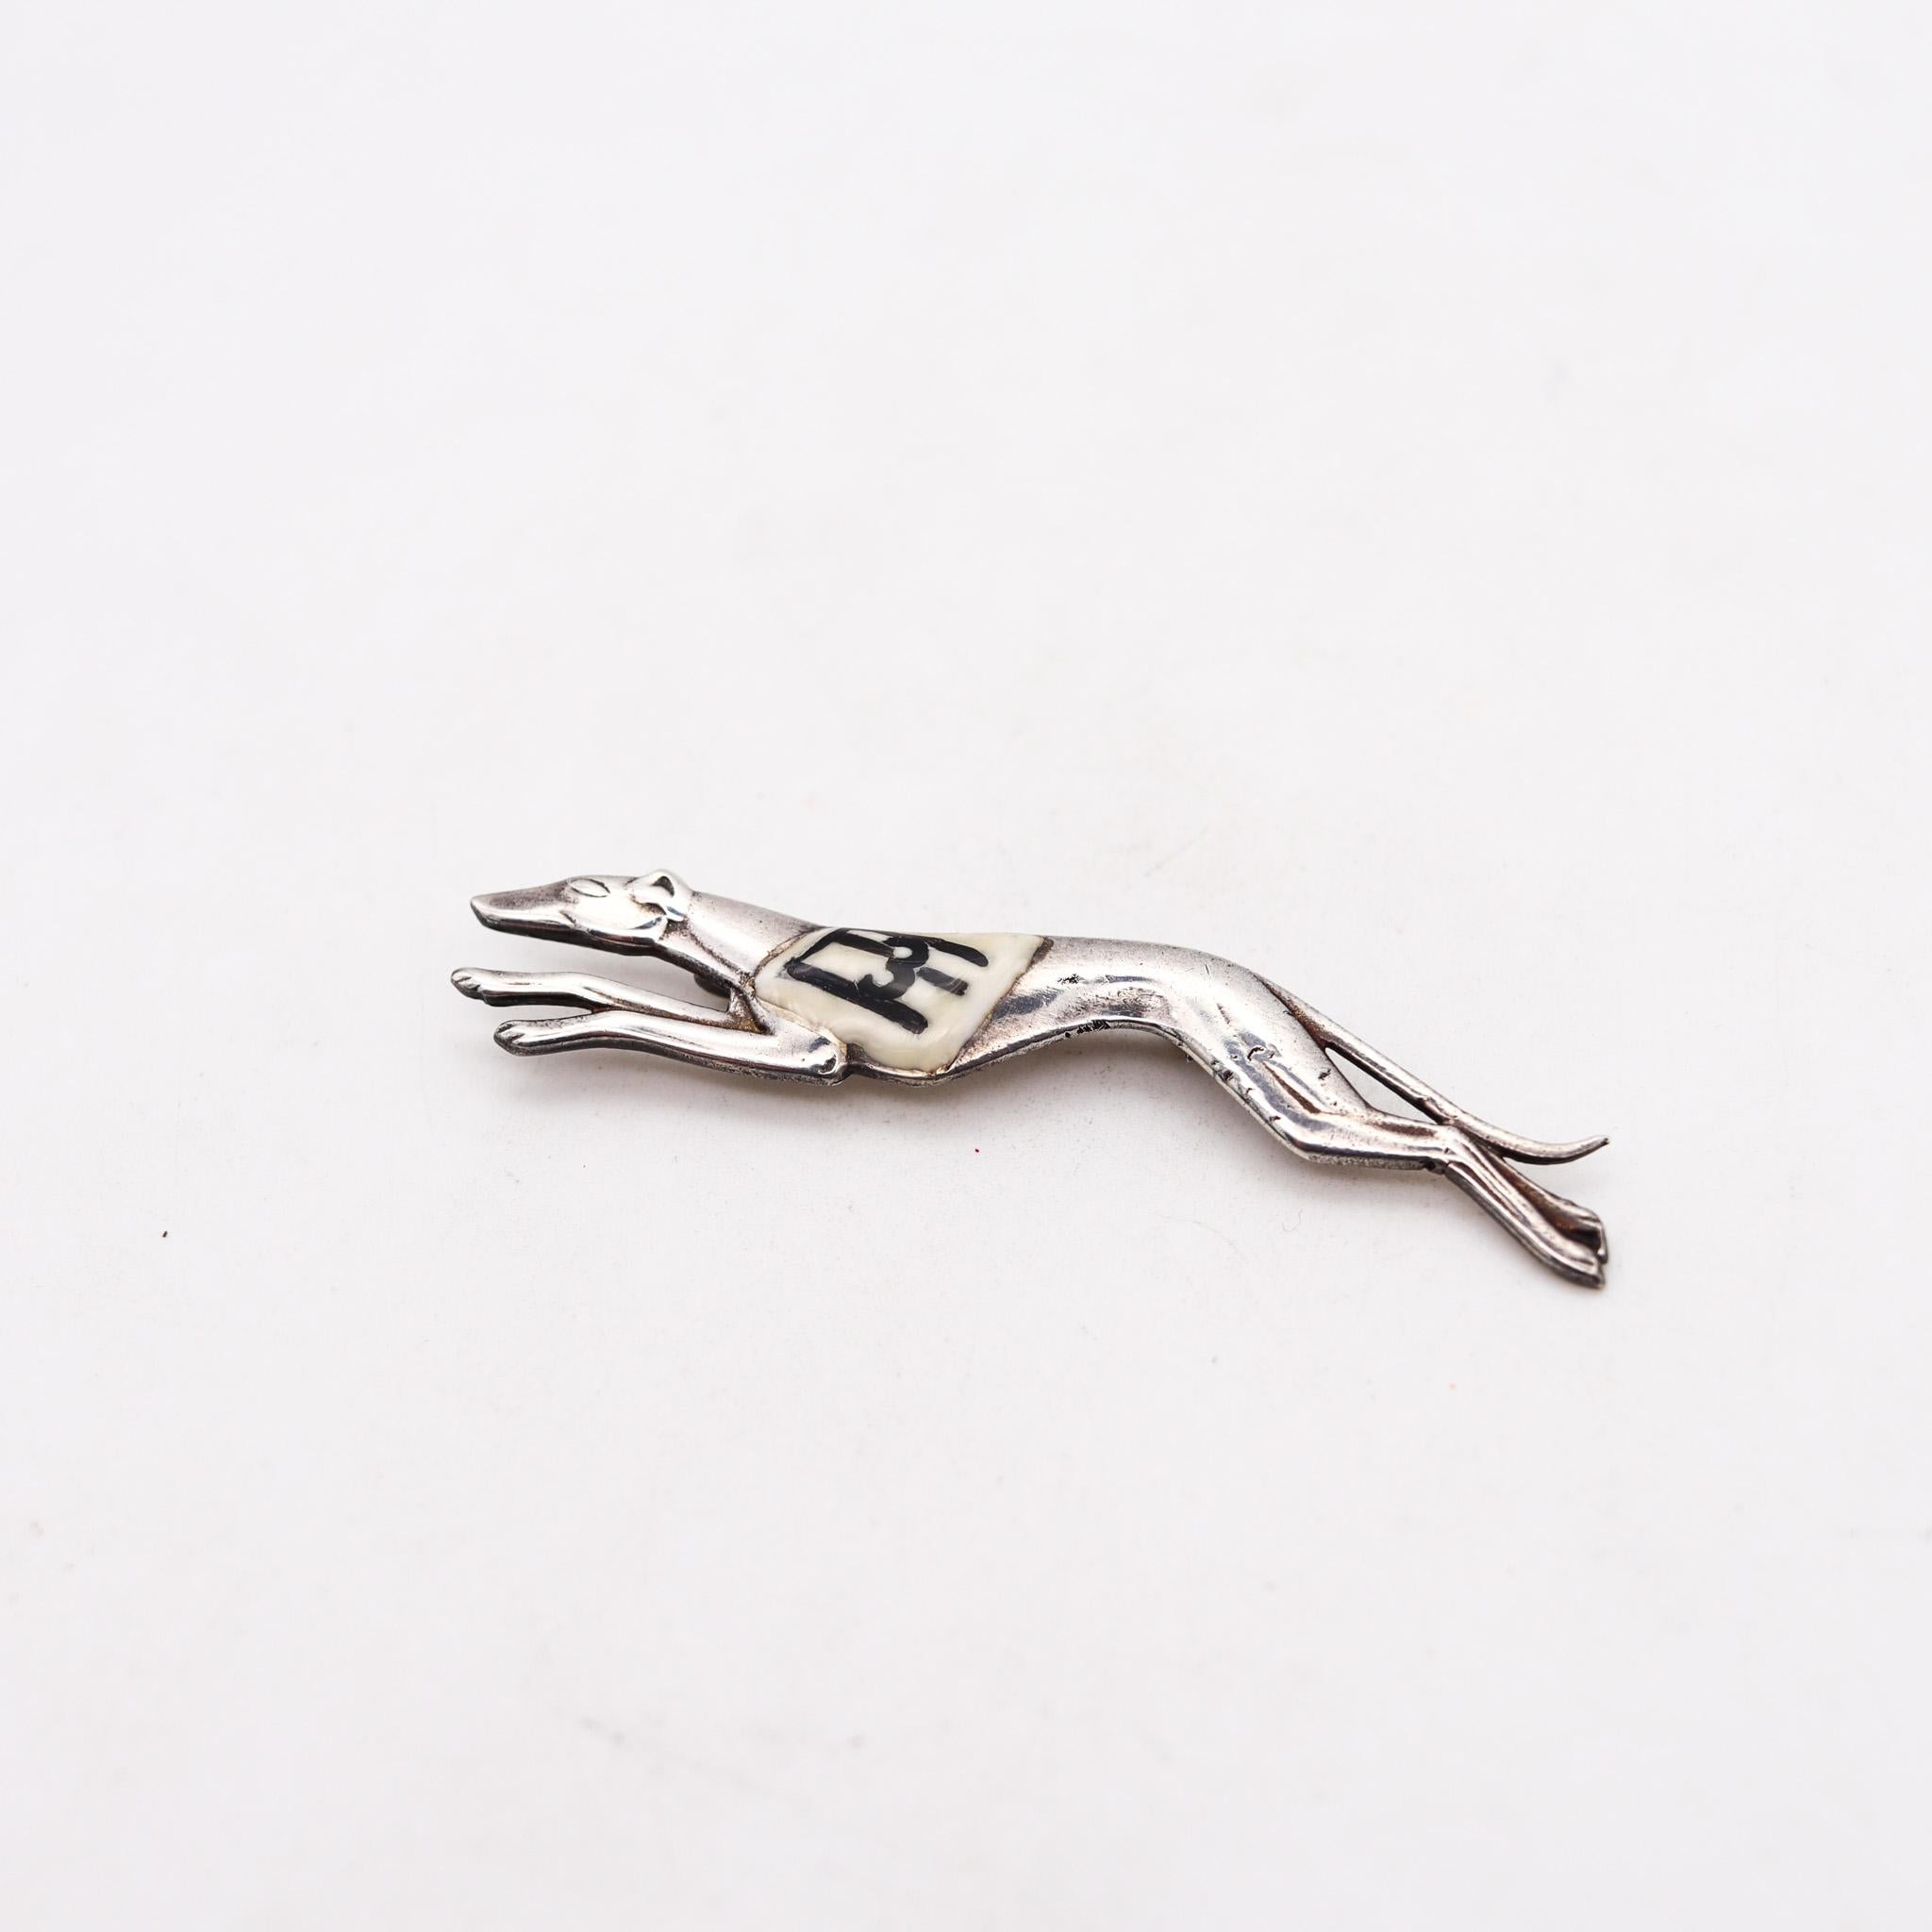 Art Deco greyhound dog brooch with number 3.

Beautiful and very stylish greyhound dog brooch, created in Germany during the art deco period, back in the 1925. This brooch has been designed with very stylized patterns and crafted in solid .925/.999